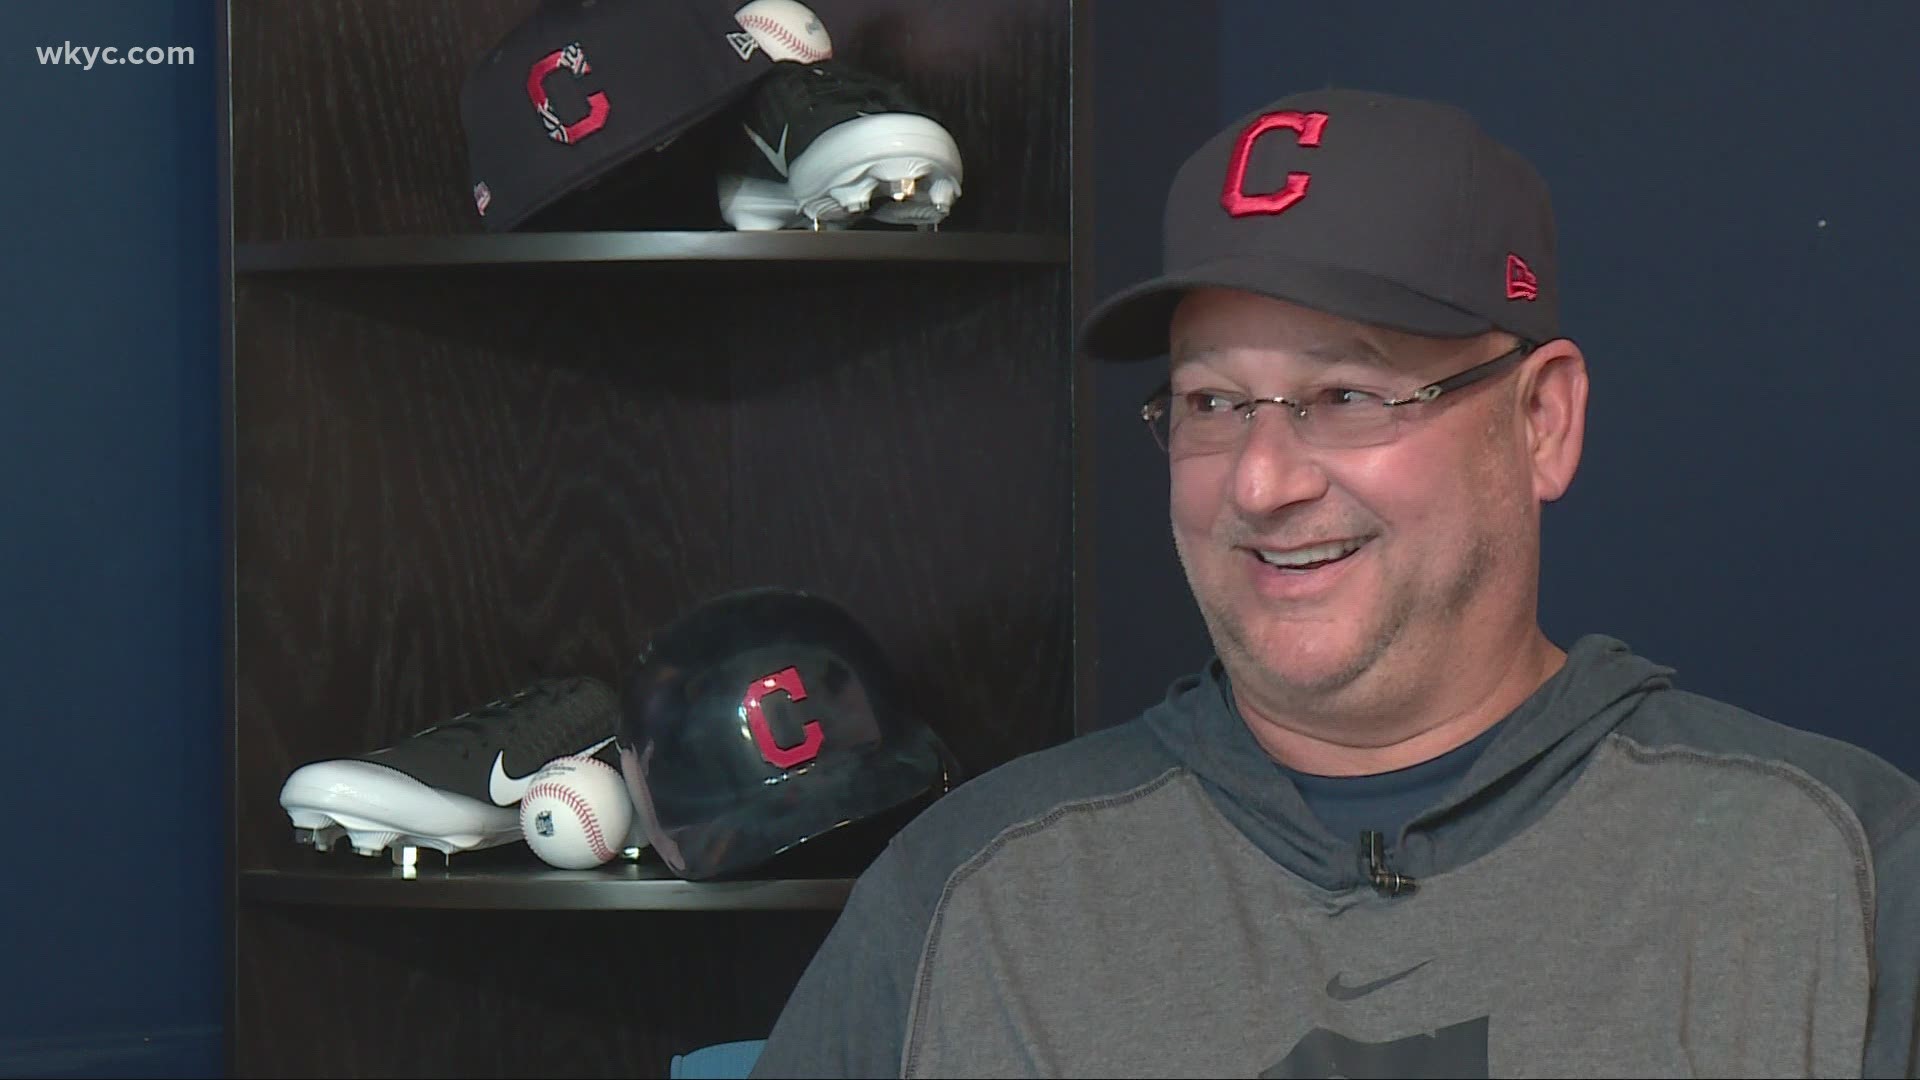 Tito Francona, father of Cleveland Indians manager Terry Francona